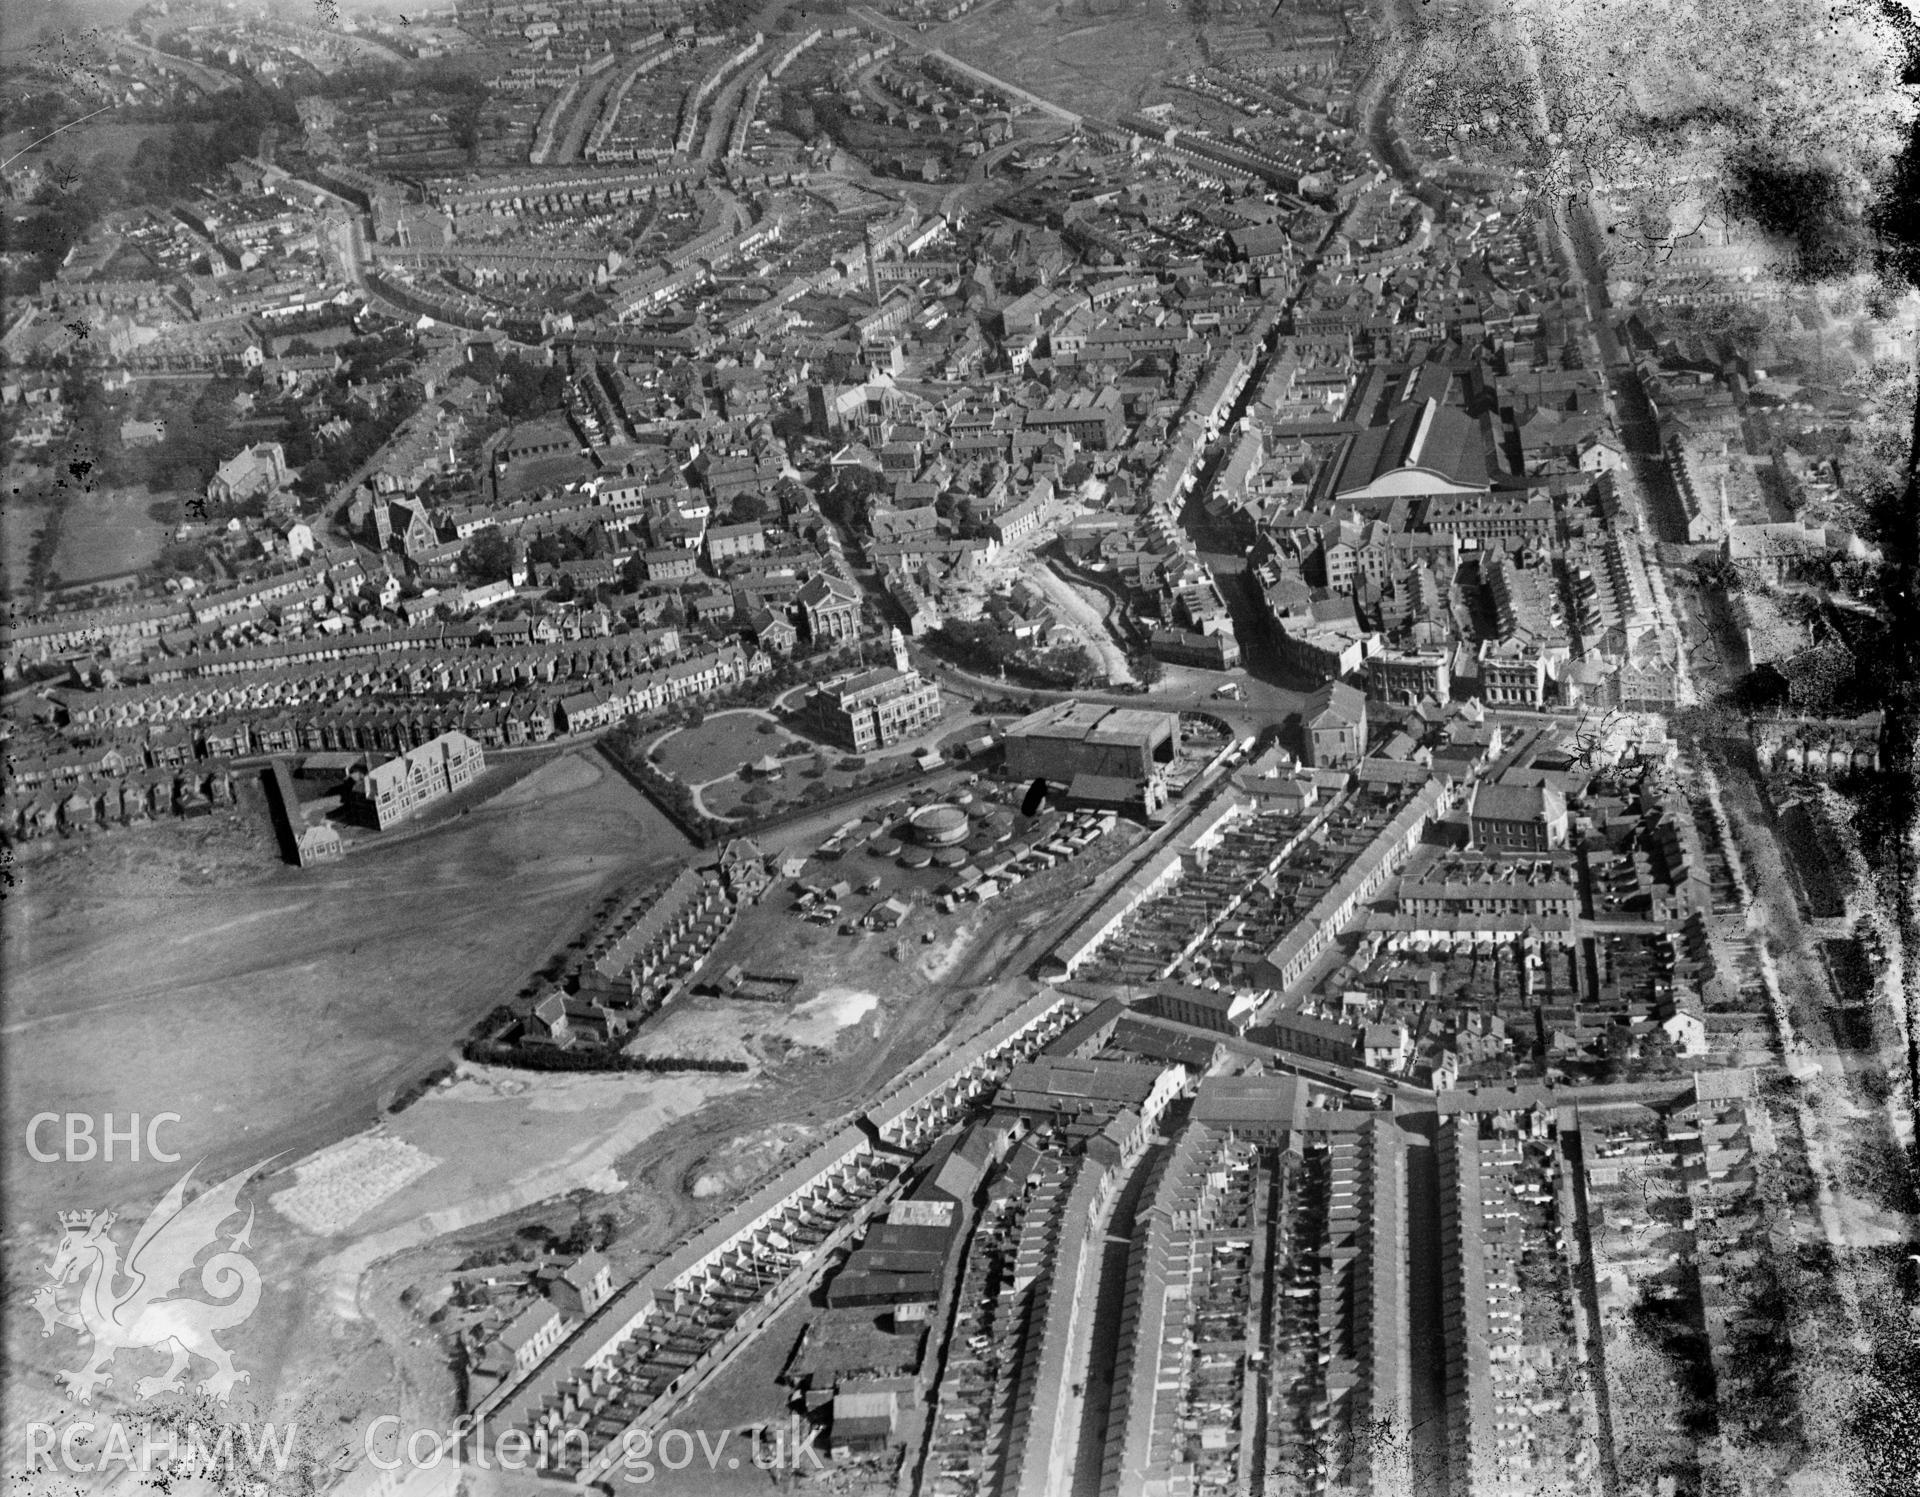 General view of Llanelli showing Town Hall and fair, oblique aerial view. 5?x4? black and white glass plate negative.